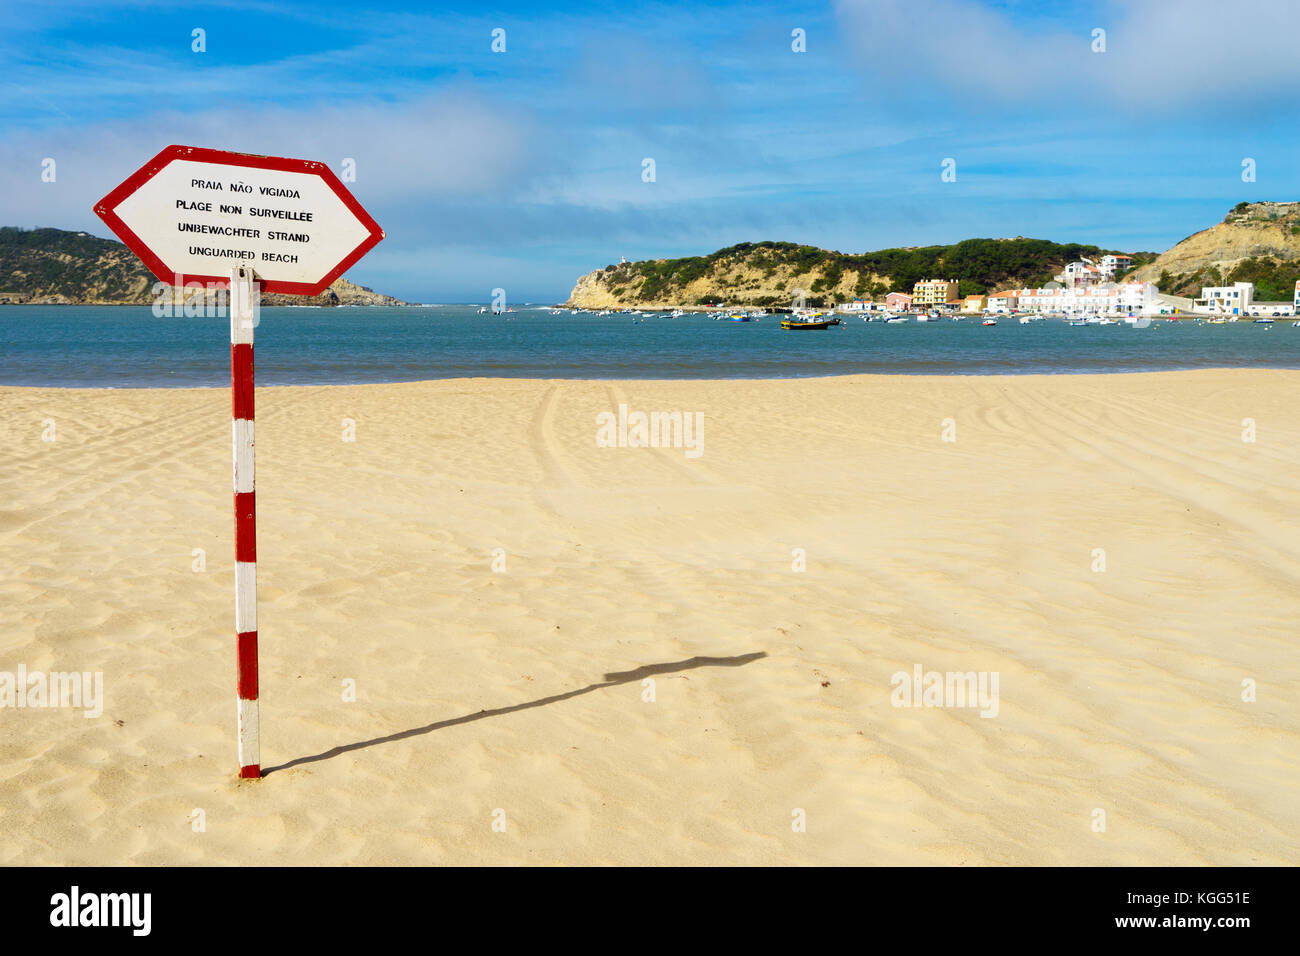 Unguarded Beach sign in four languages on red and white post on the beach in São Martinho do Porto, Silver Coast, Portugal, October 2017 Stock Photo